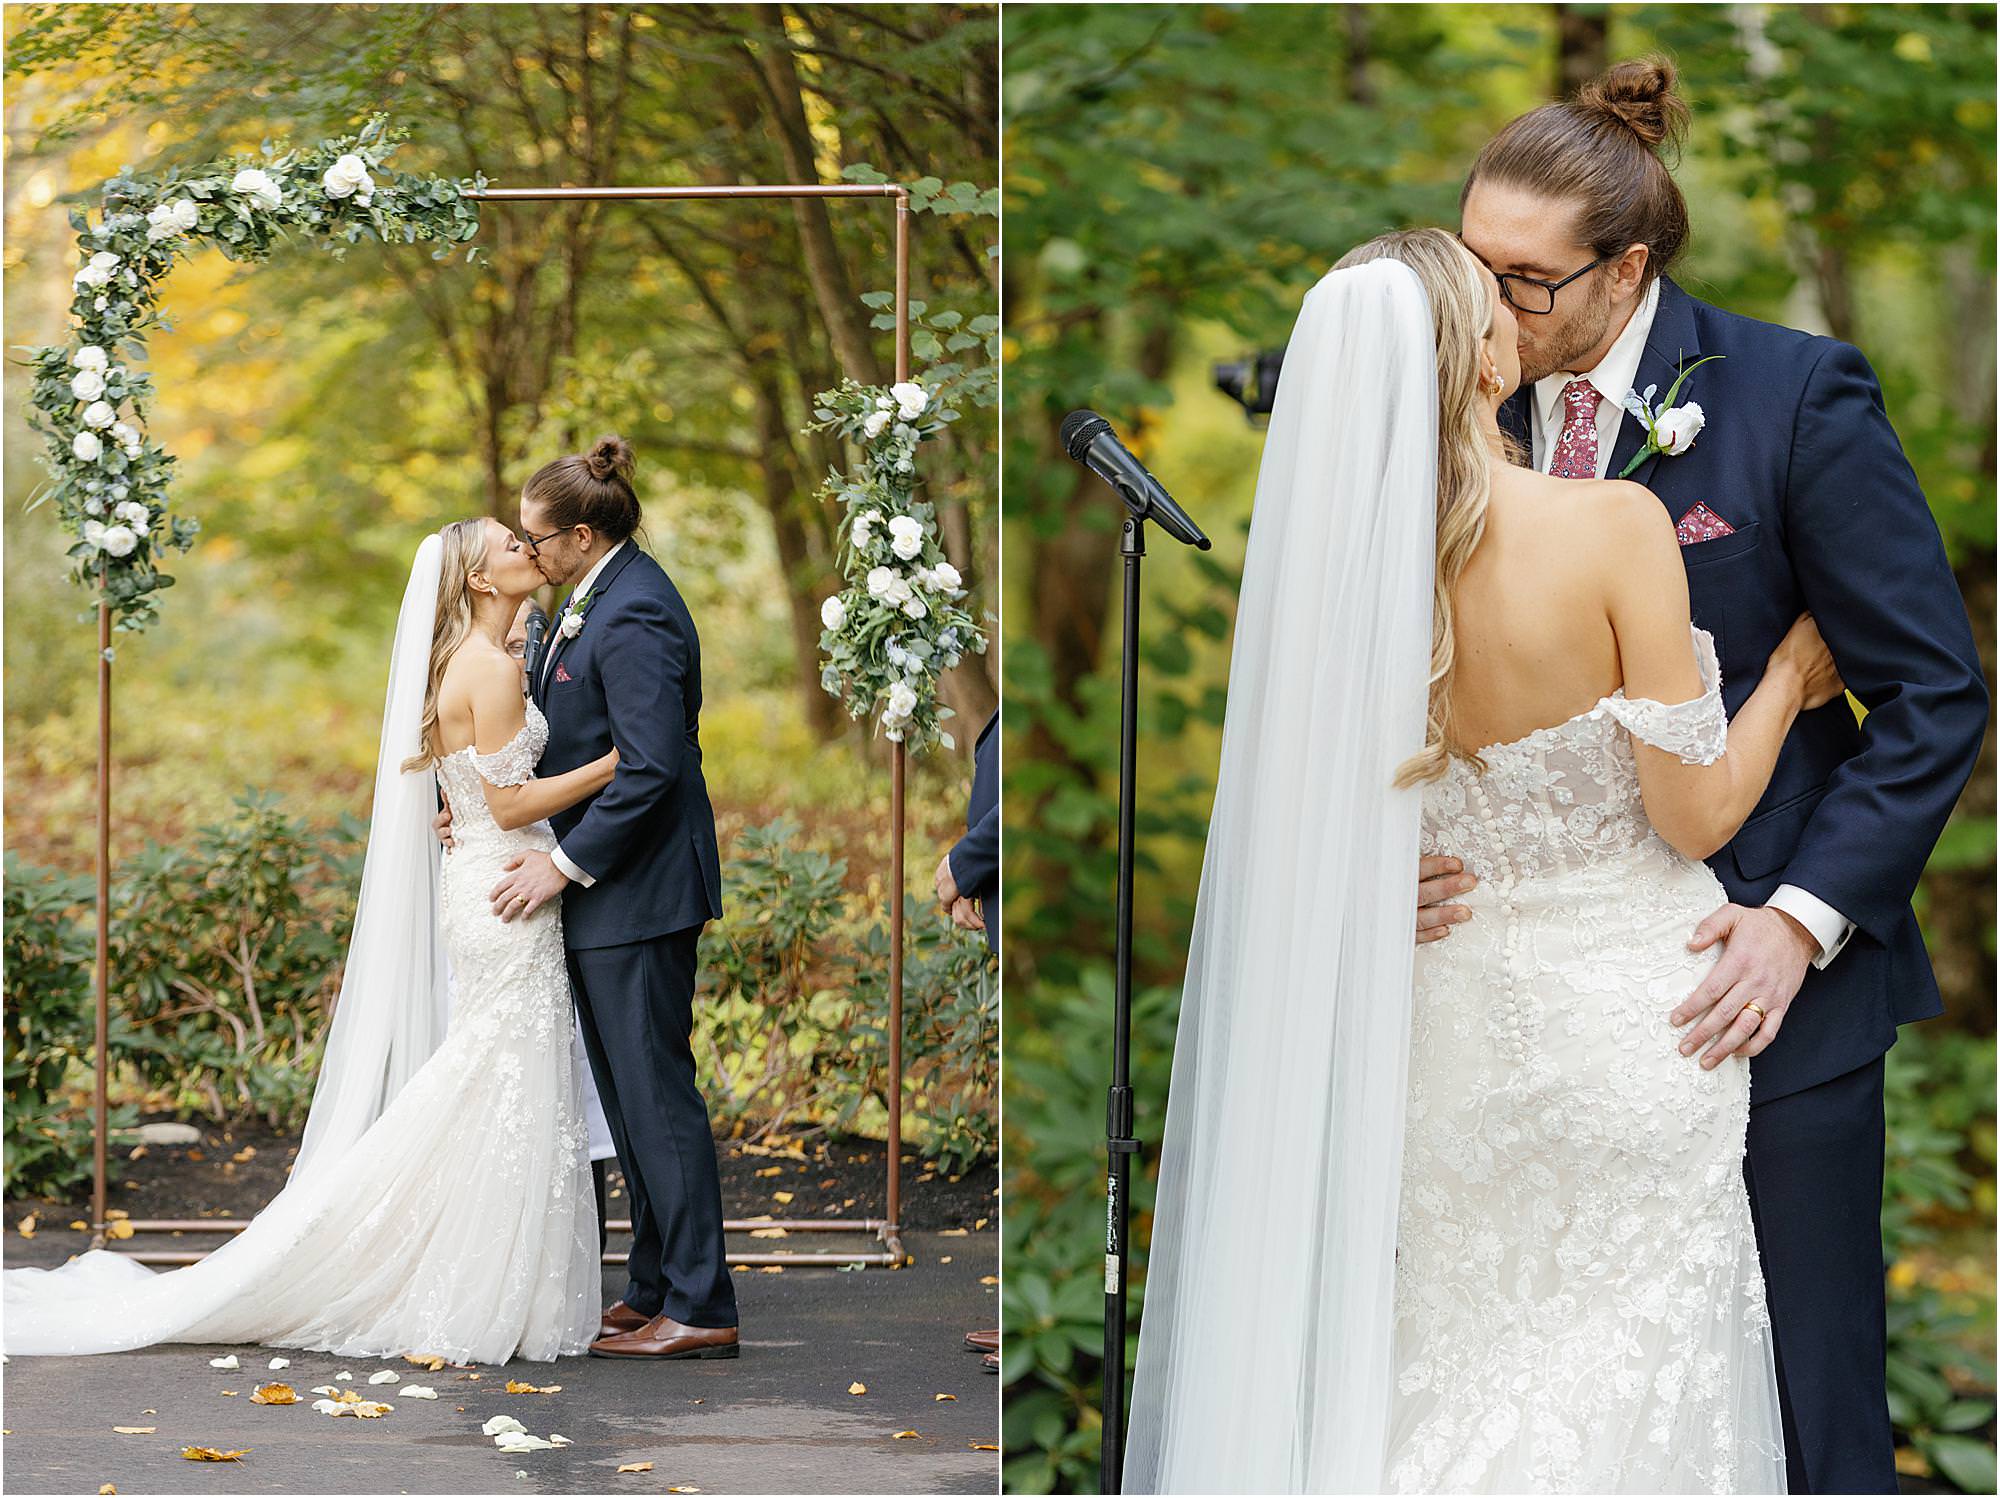 Bride and groom's first kiss after ceremony at romantic Stonehurst at Hampton Valley wedding